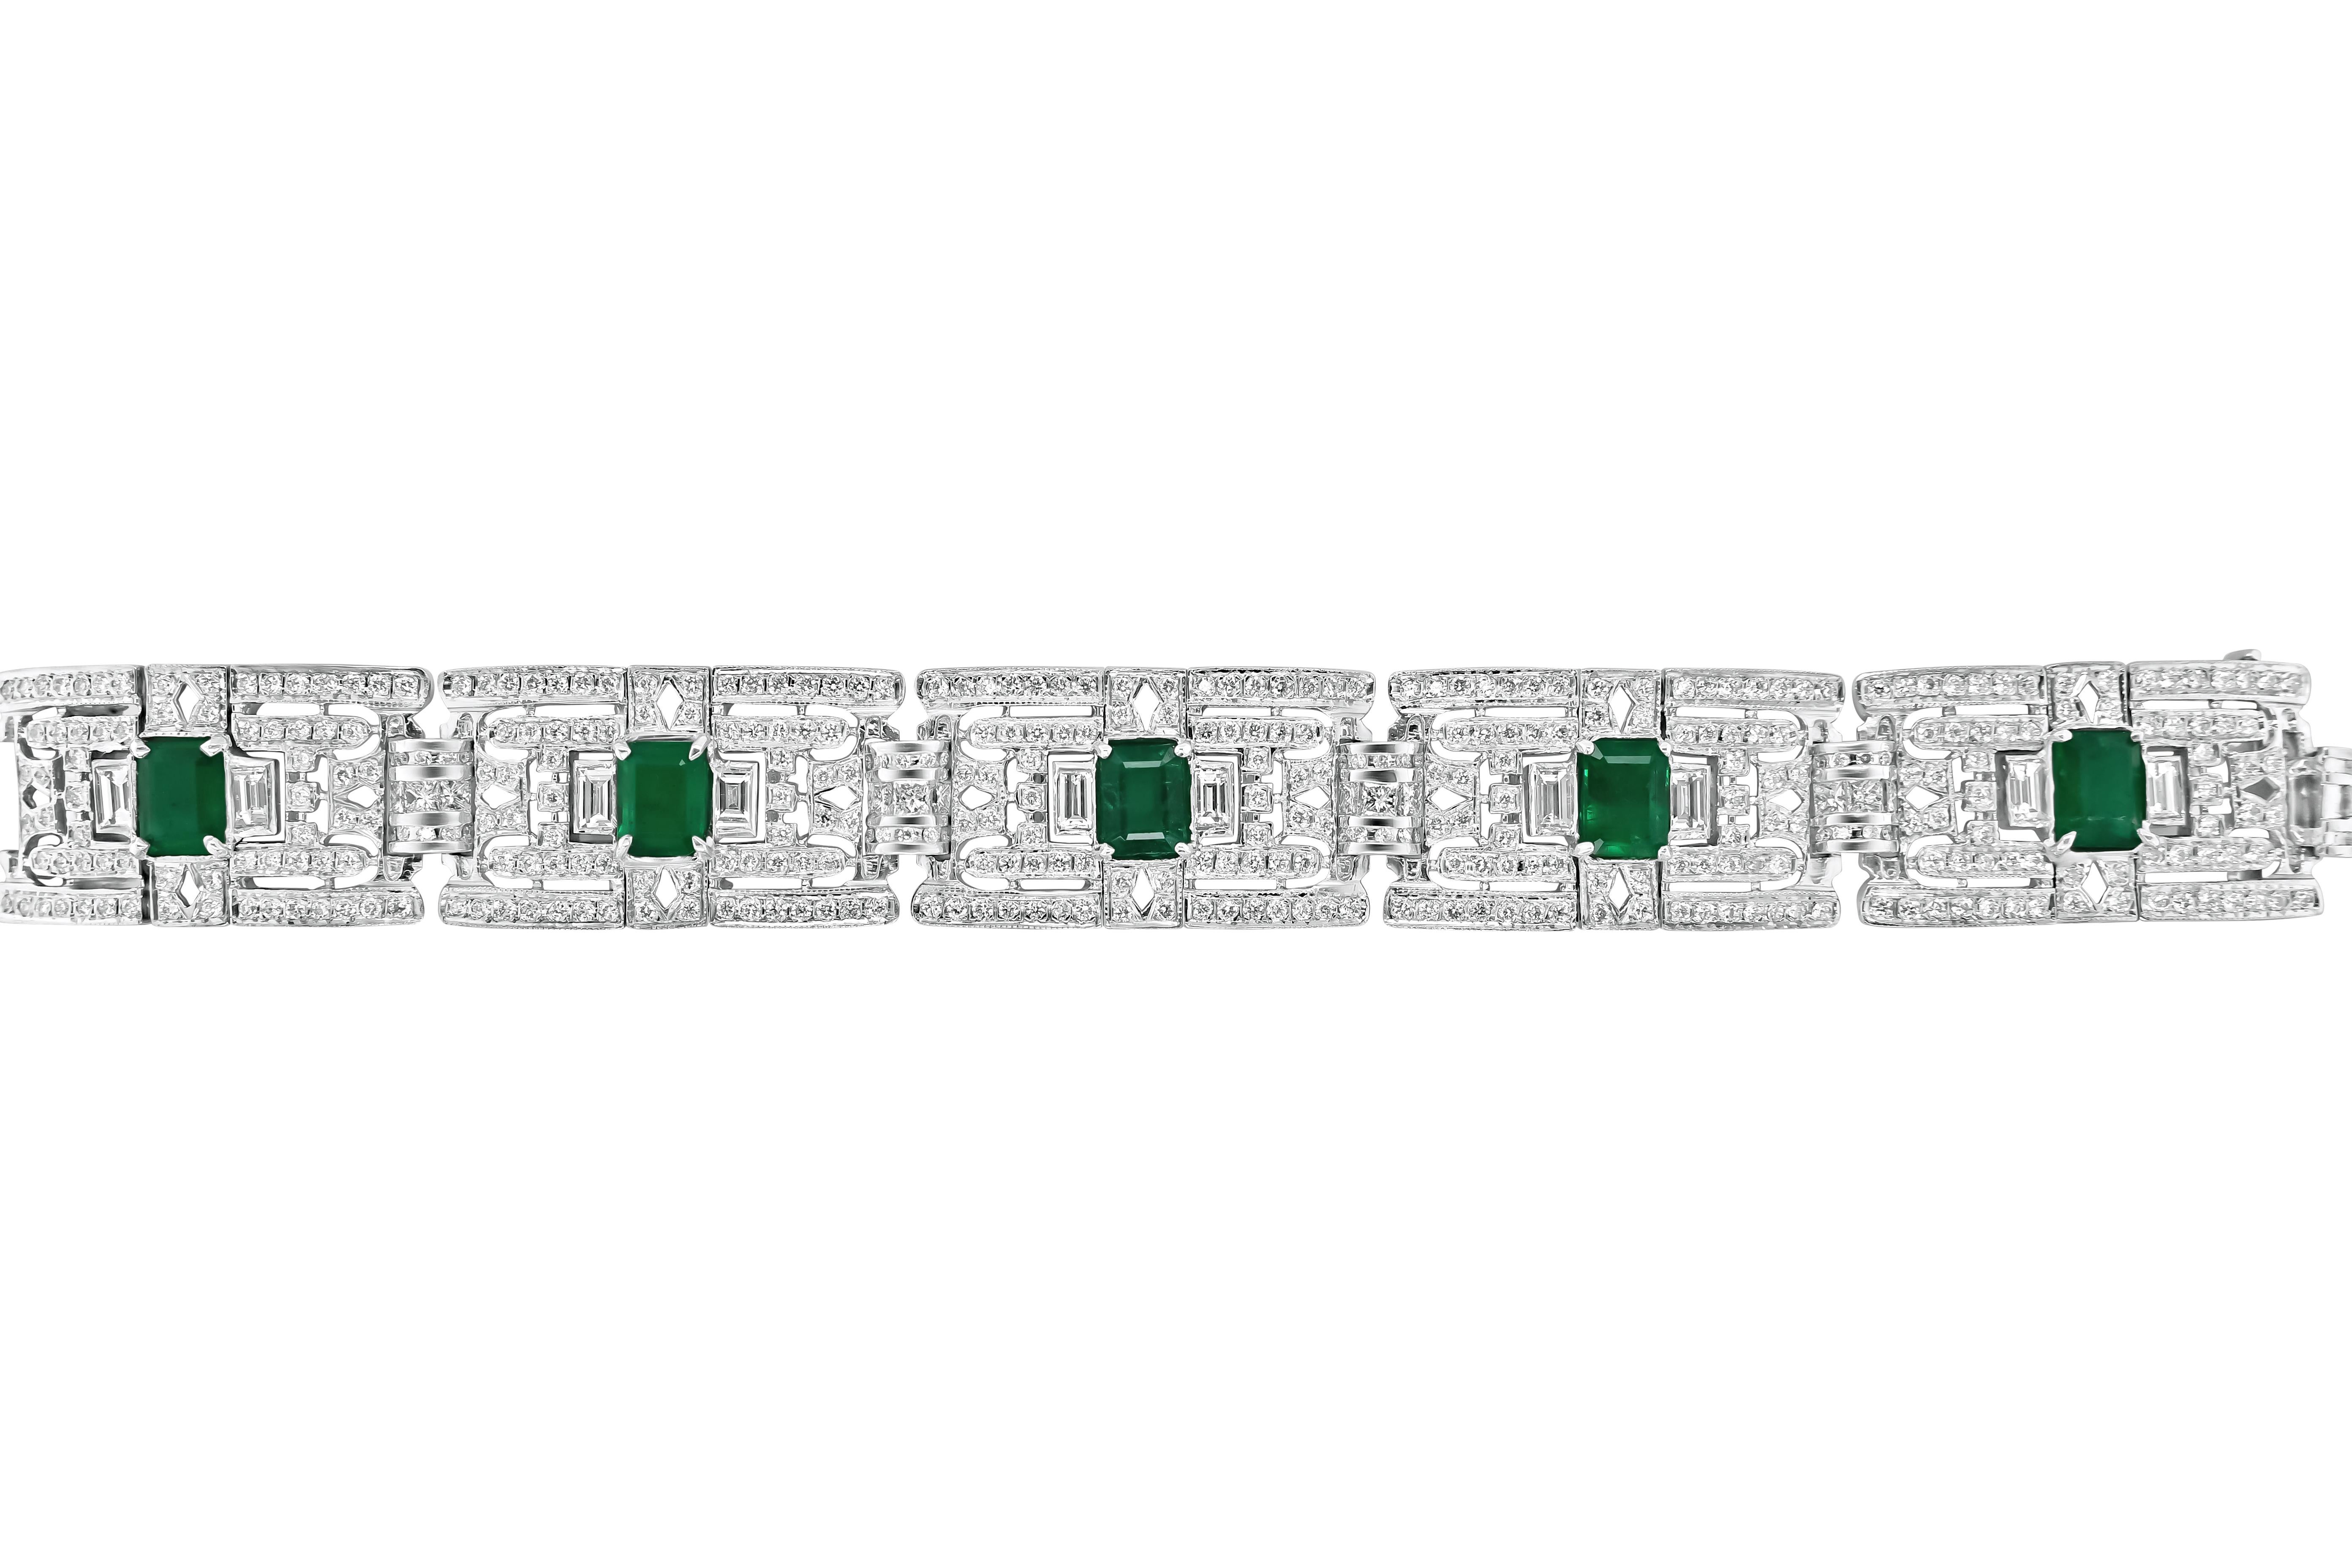 Magnum Creations original art deco style bracelet, features 4.05 carats of white round diamonds and 2.98 carats of white fancy shapes, addittionally 6.82 carats of emeralds.

This style is also available in sapphire, please visit our vendor profile